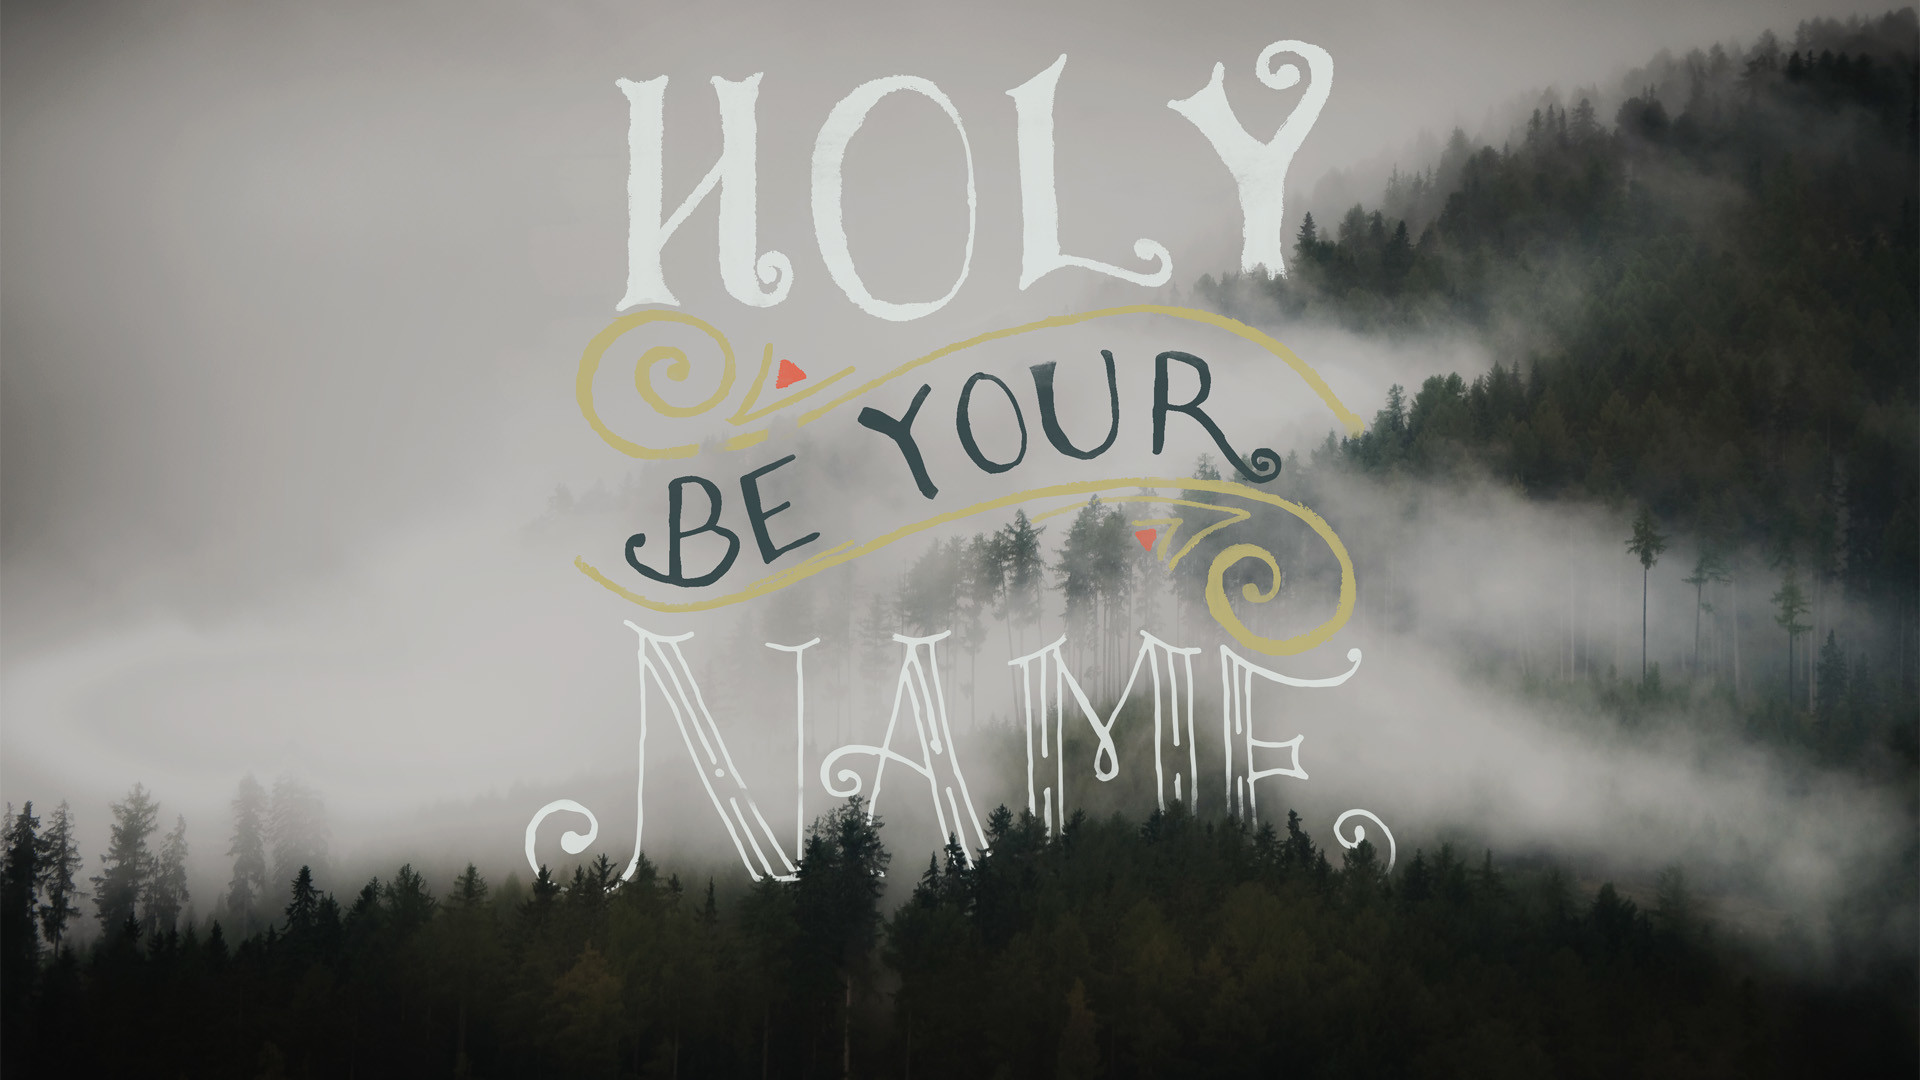 1920x1080 Free Biblical Wallpaper – Holy be Your Name